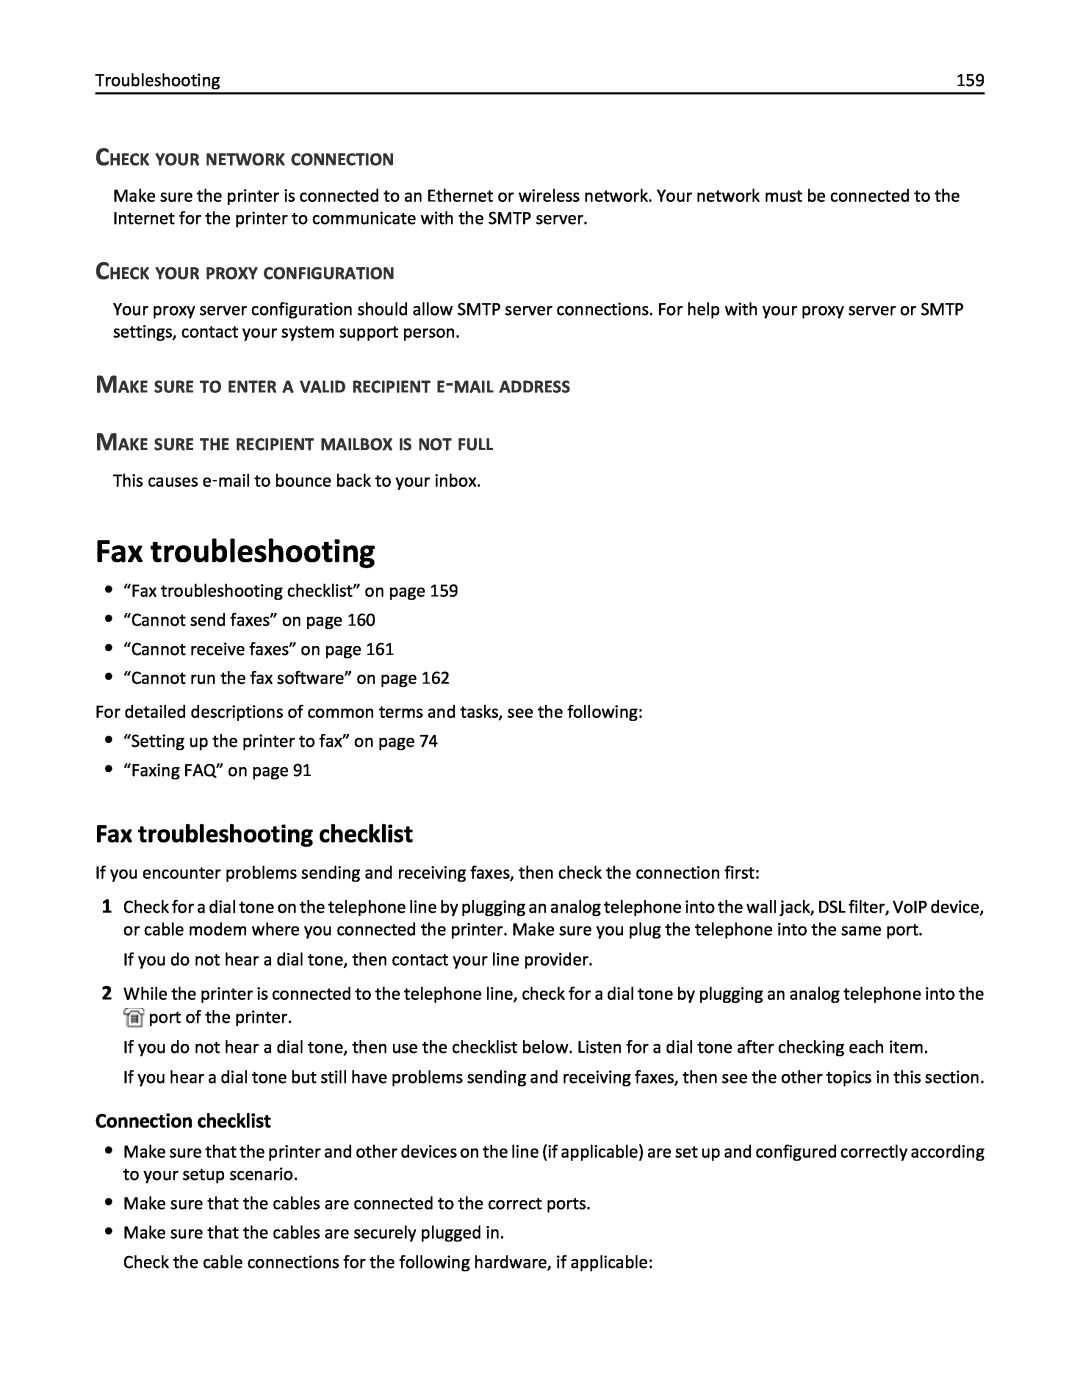 Lexmark 200, 20E manual Fax troubleshooting checklist, Check Your Network Connection, Check Your Proxy Configuration 